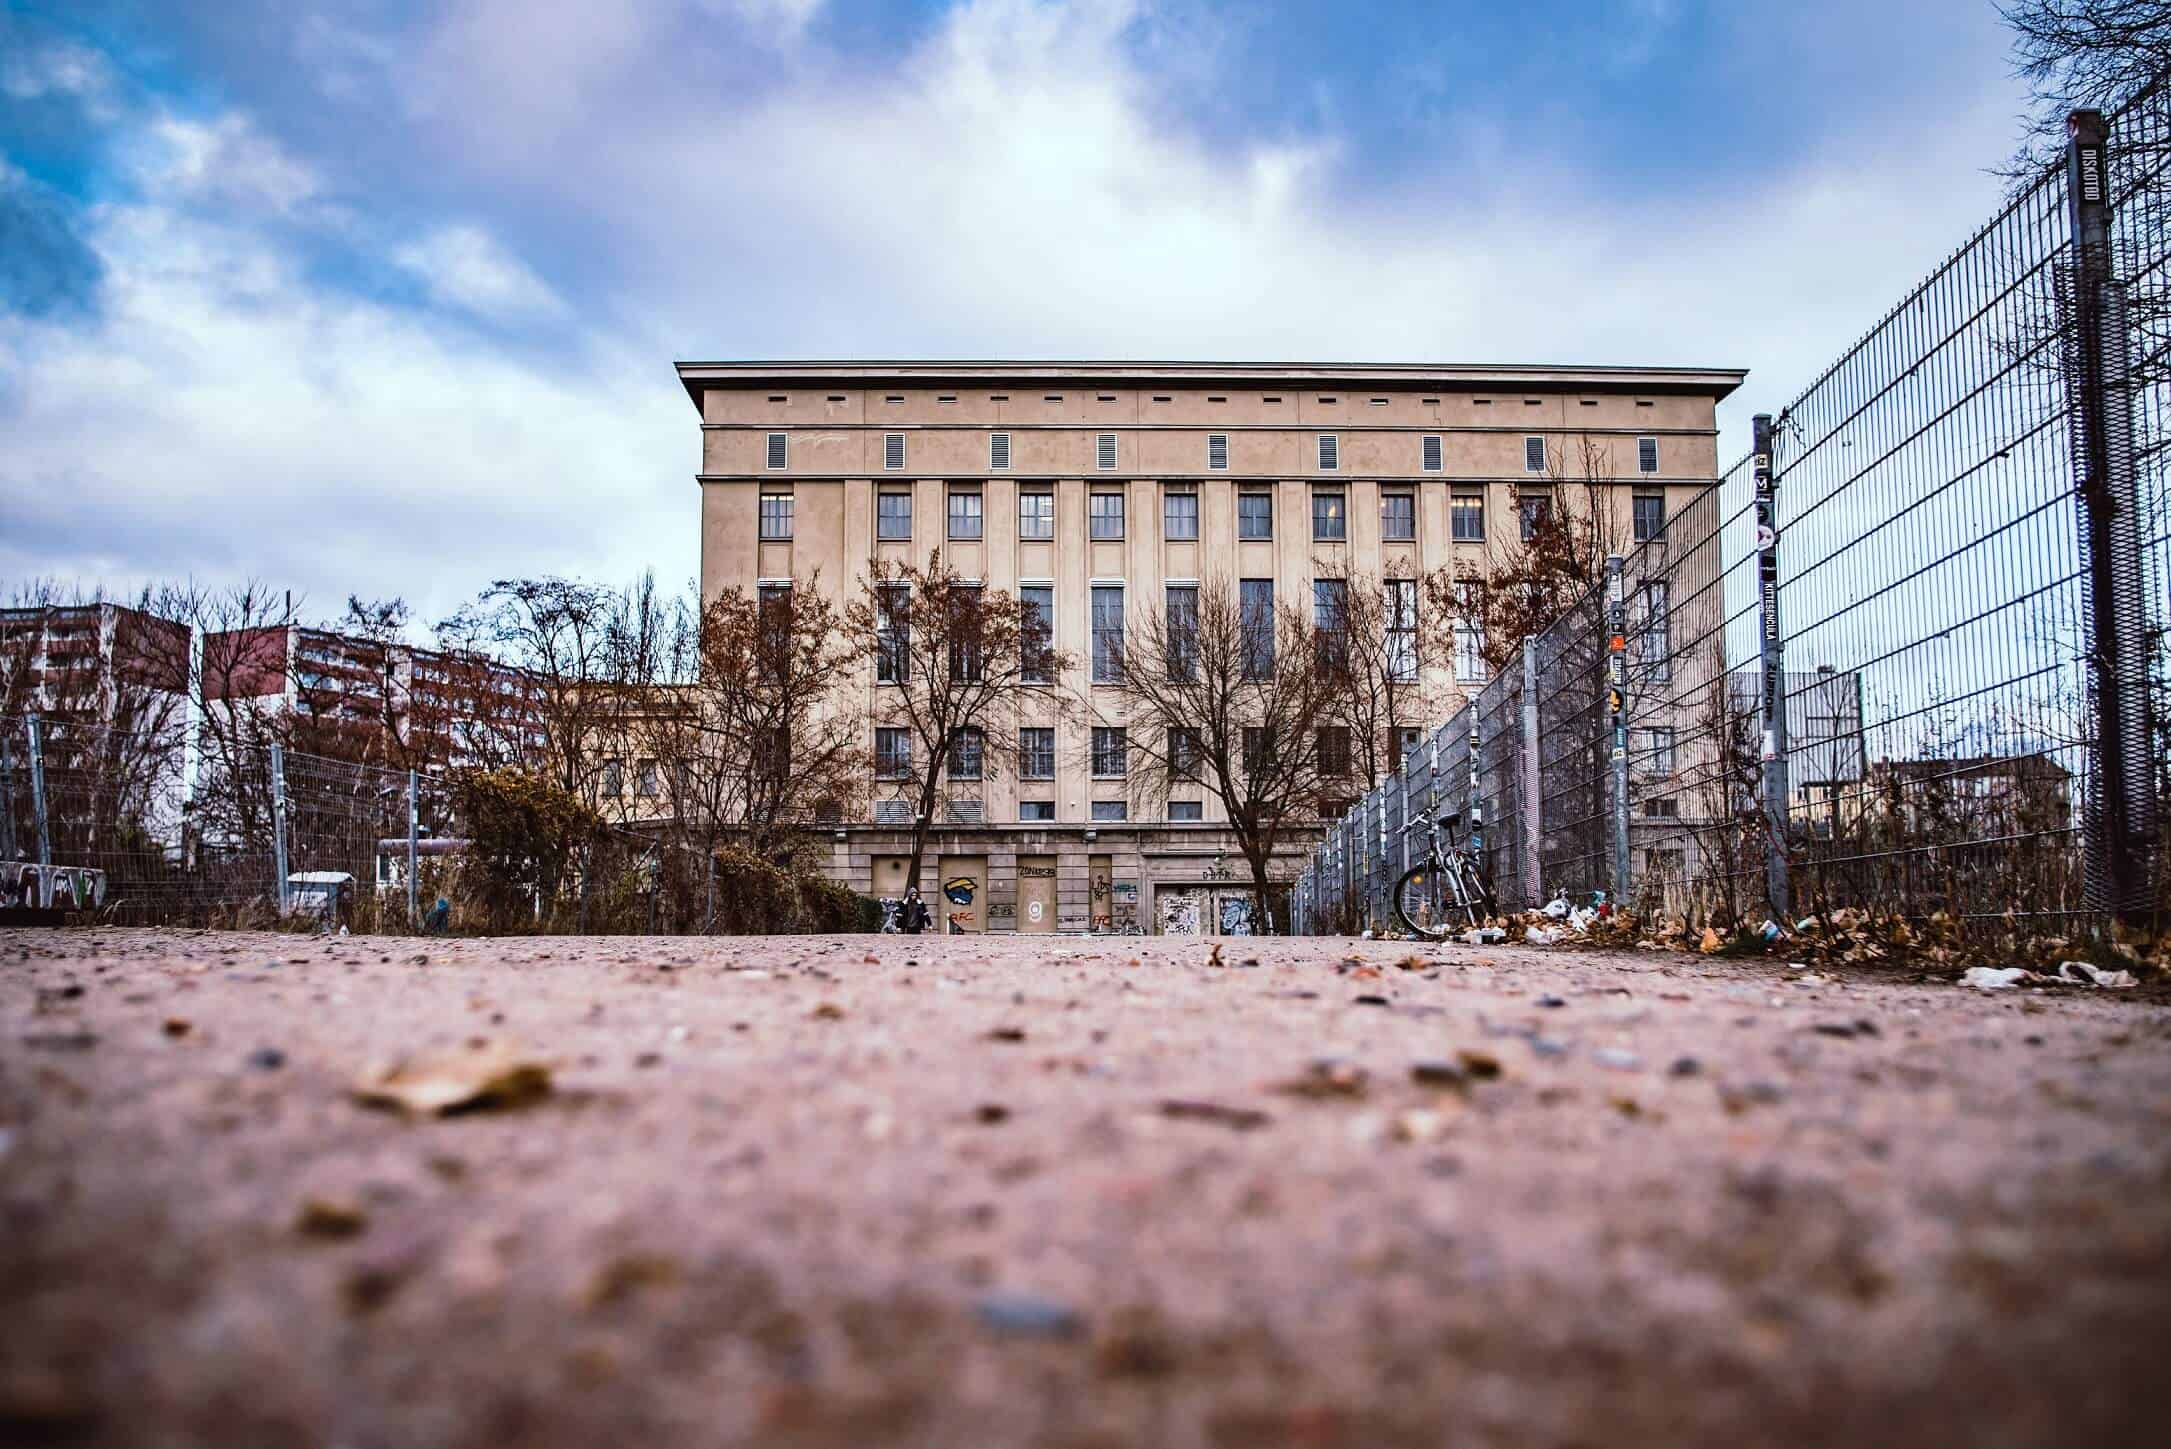 Berghain Nights: an upcoming exploration of Berlin’s techno scene coming in 2025